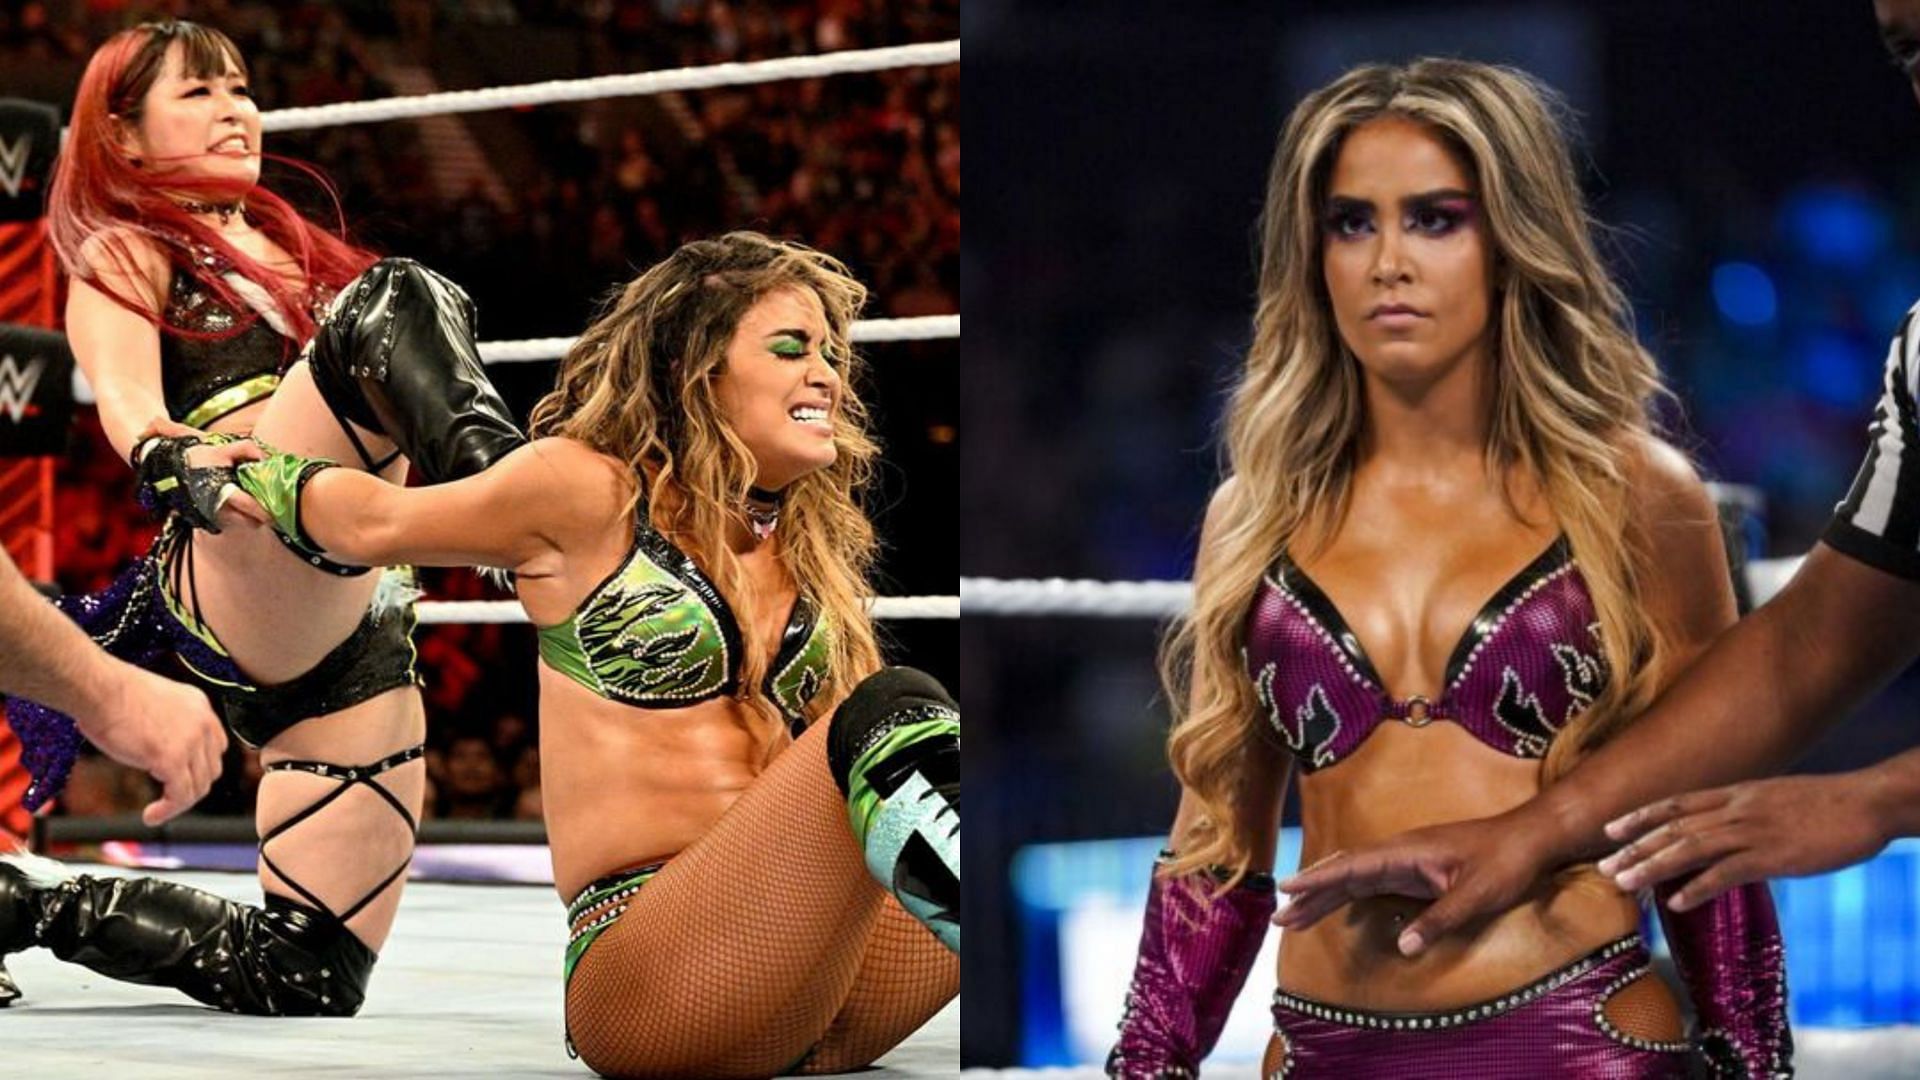 Aliyah is currently out of action due to injury